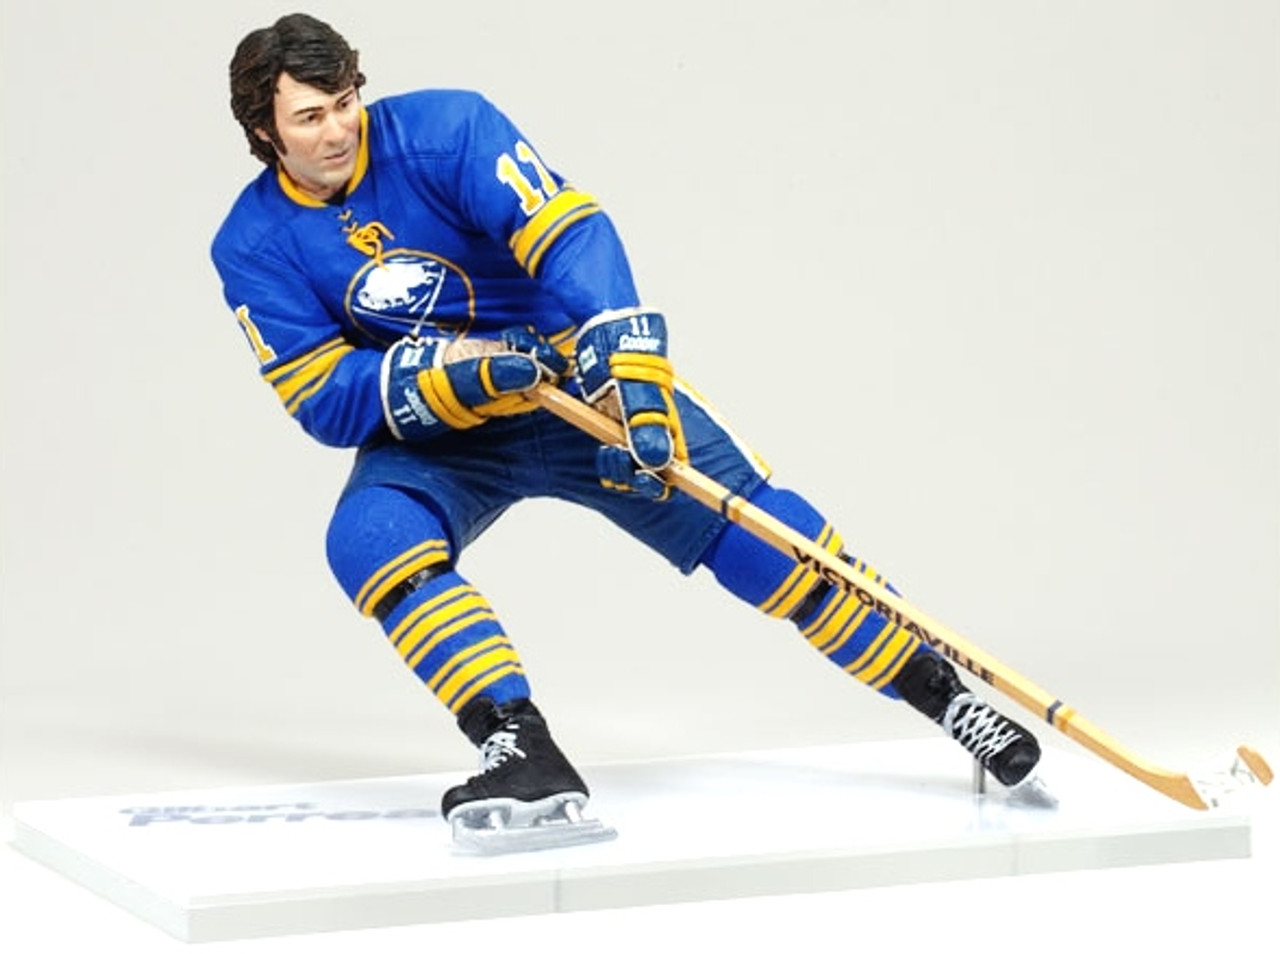 McFarlane Toys Exclusively Released Canadian NHL Figures